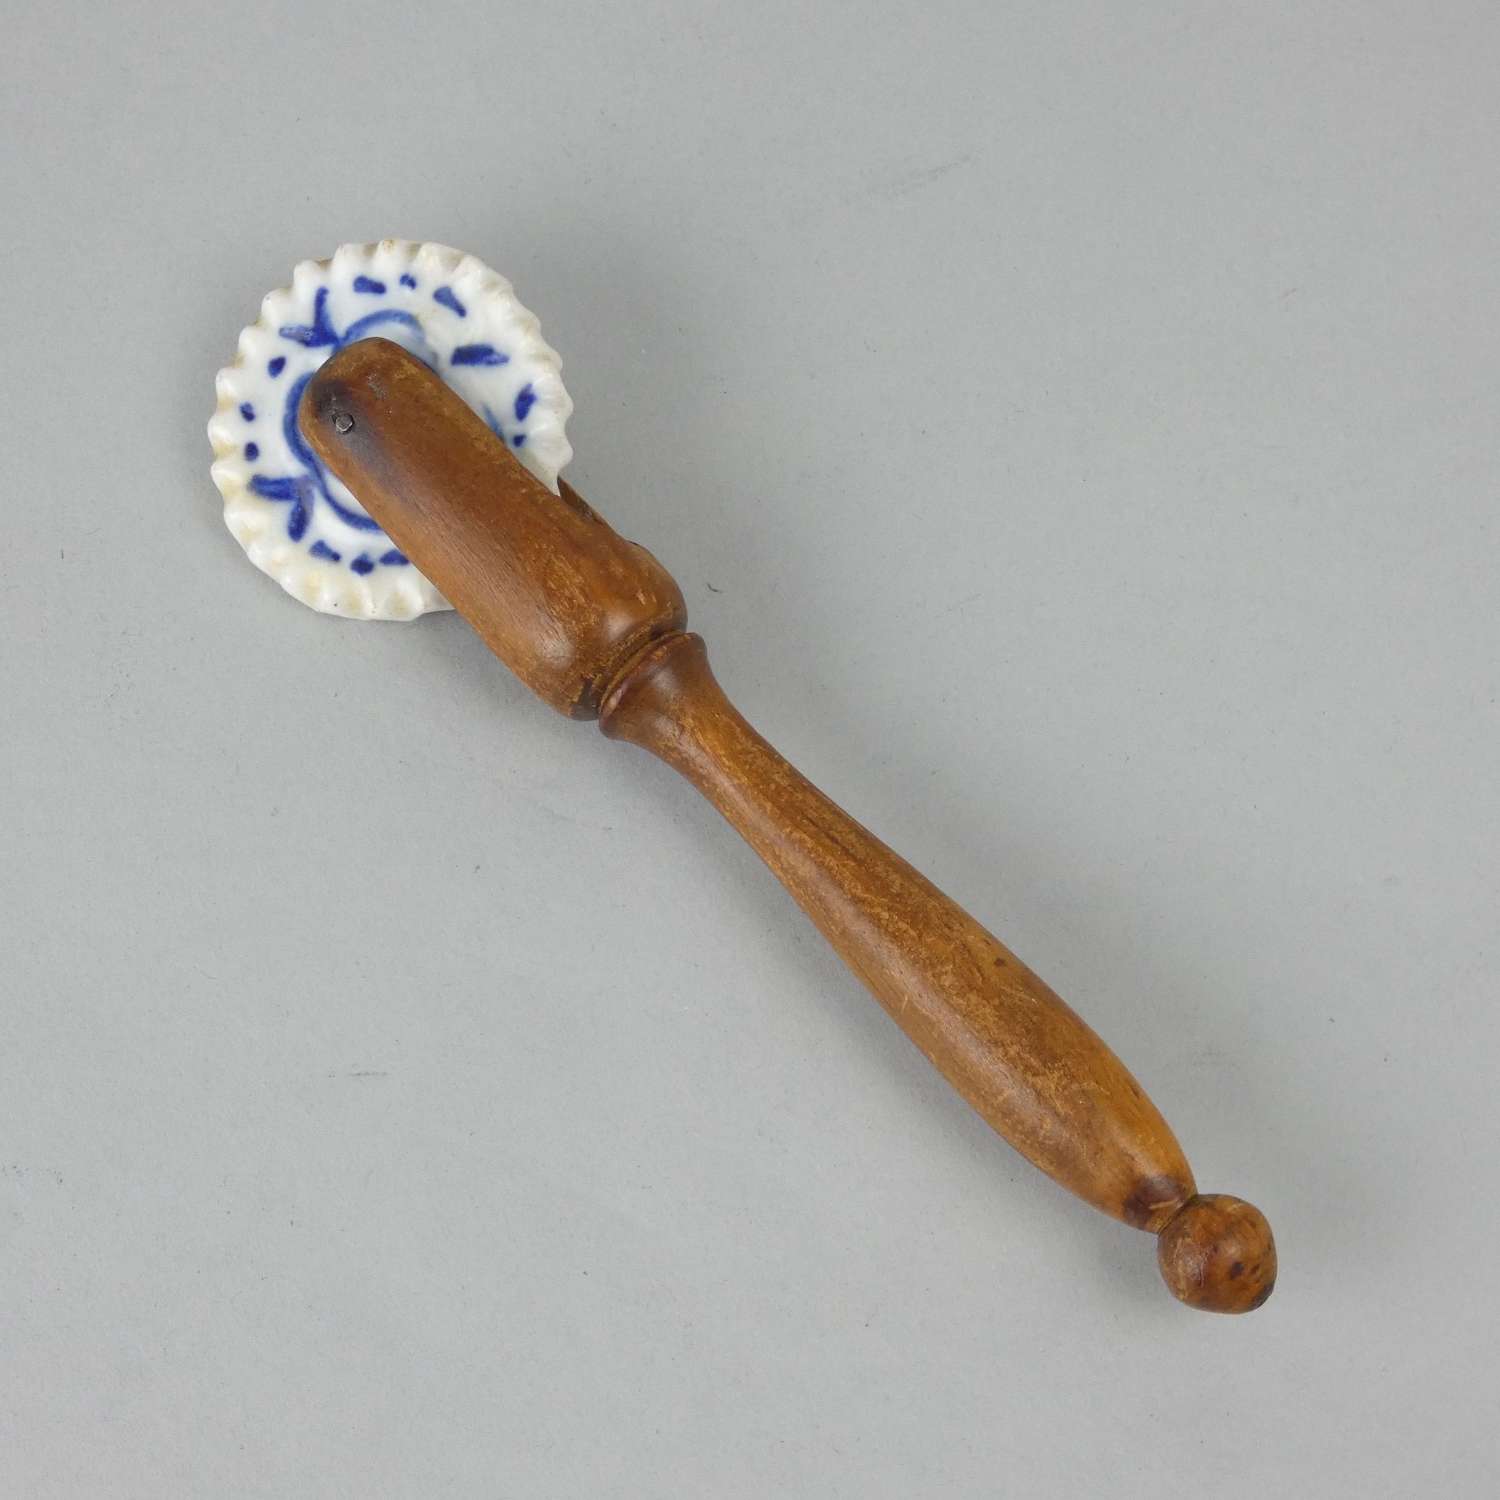 Blue and white porcelain pastry wheel